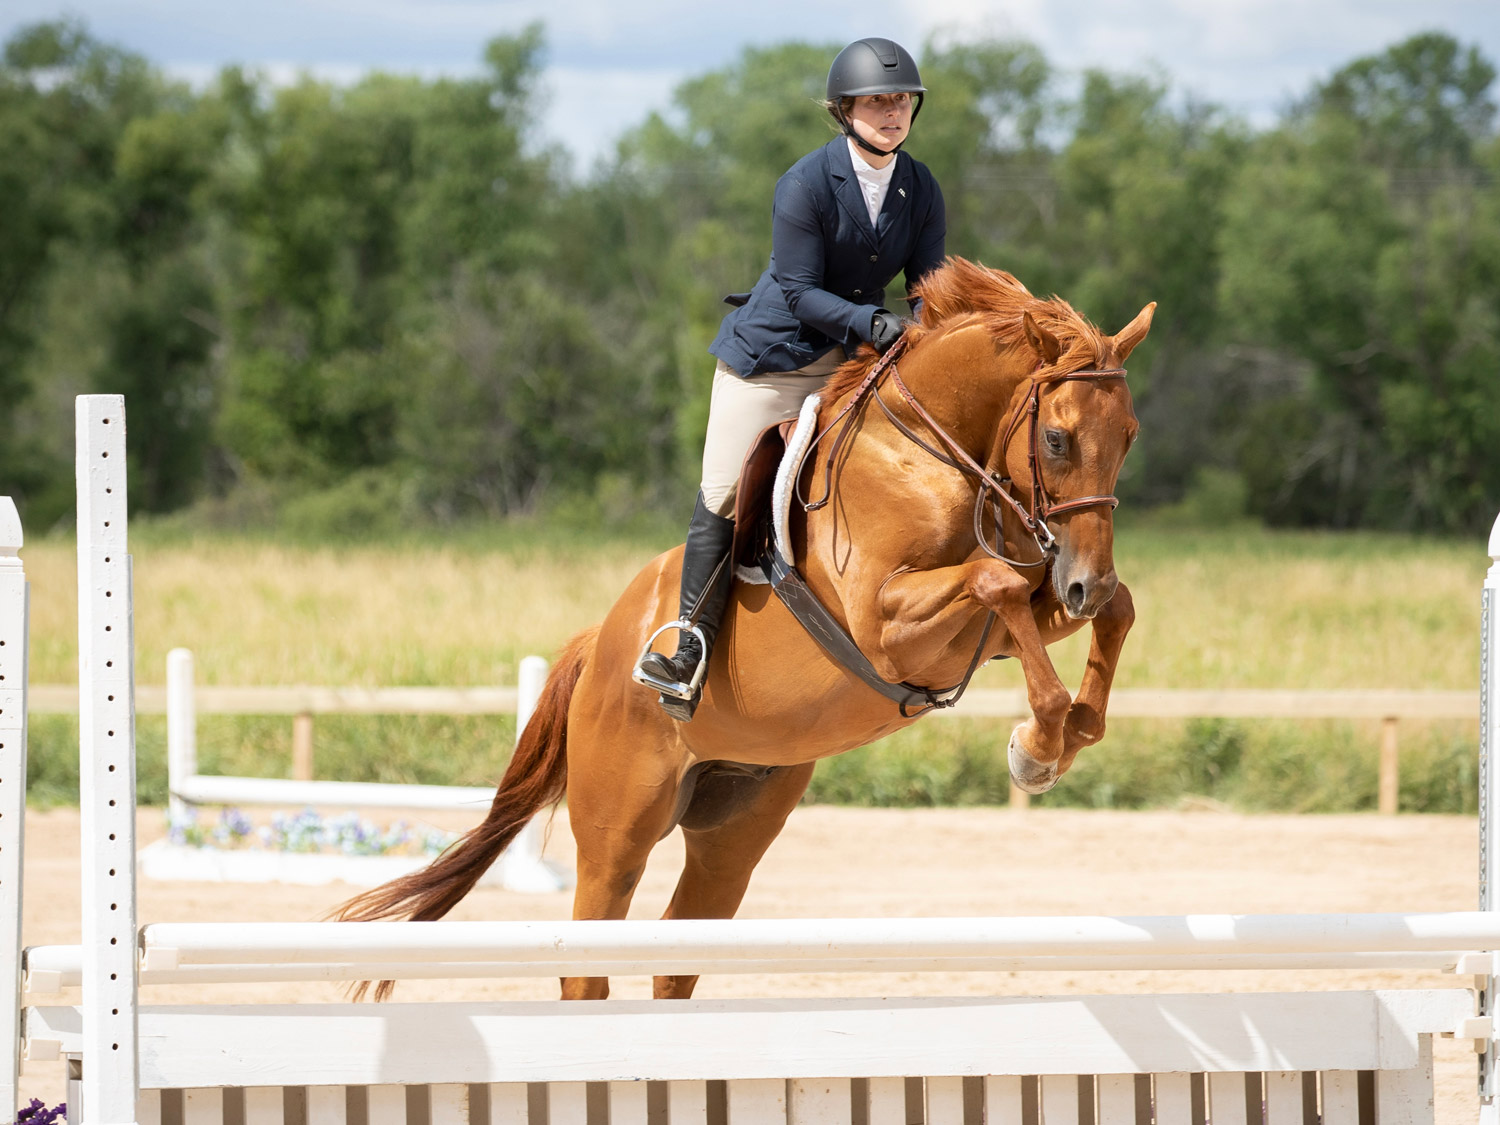 A chestnut horse named Over The Moon performs a perfect Hunter jump